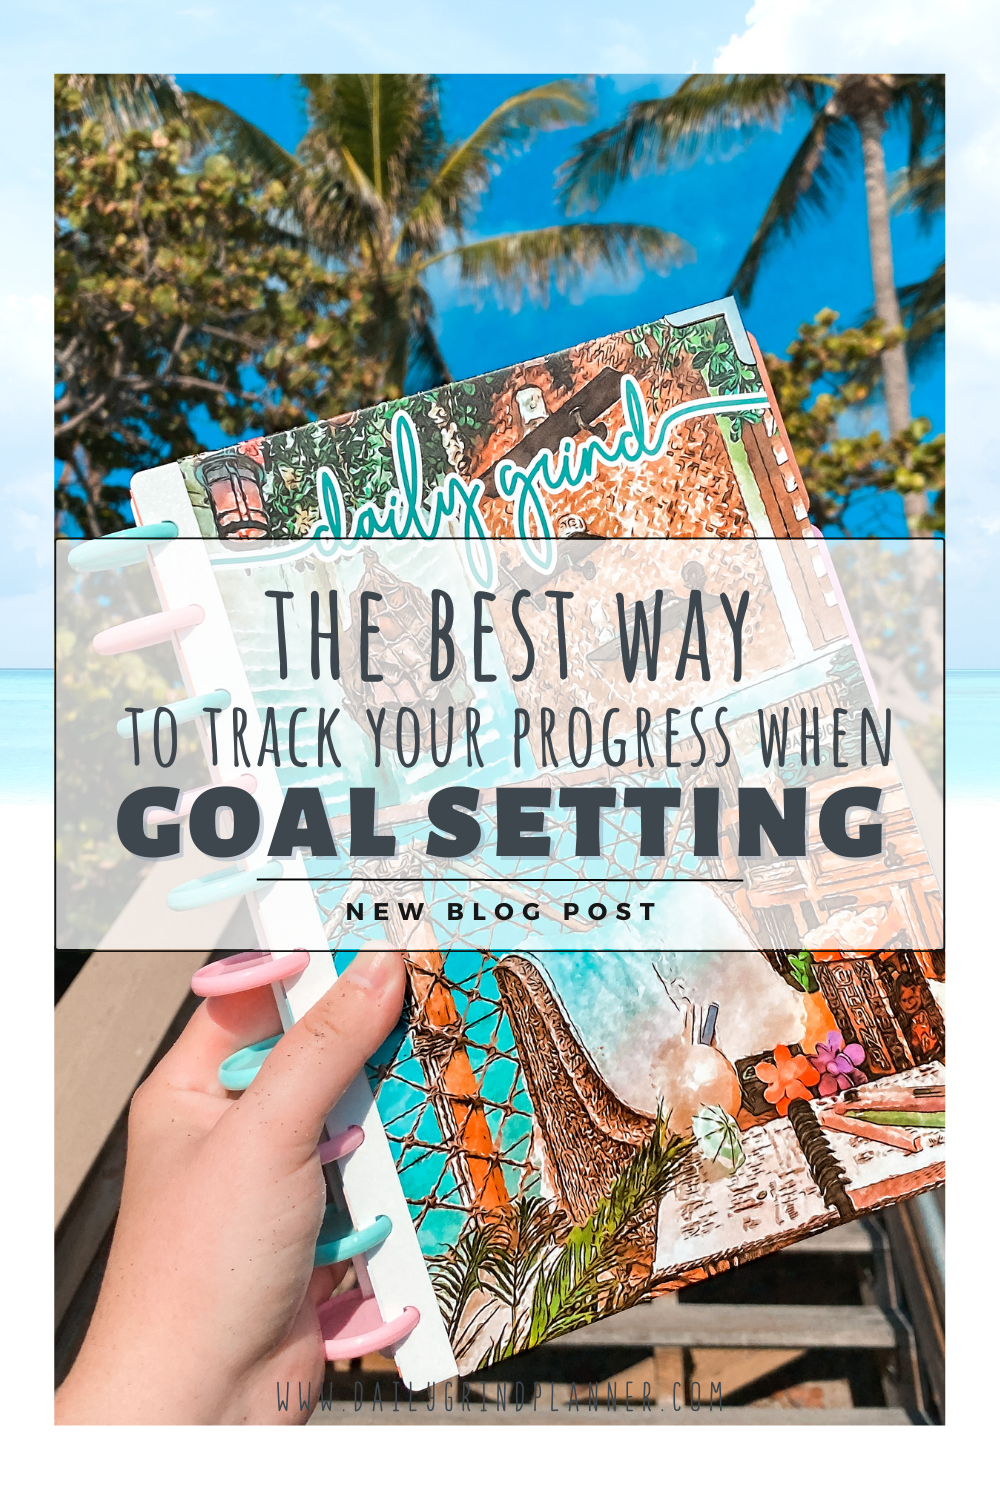 THE BEST WAY TO TRACK YOUR PROGRESS WHEN GOAL SETTING